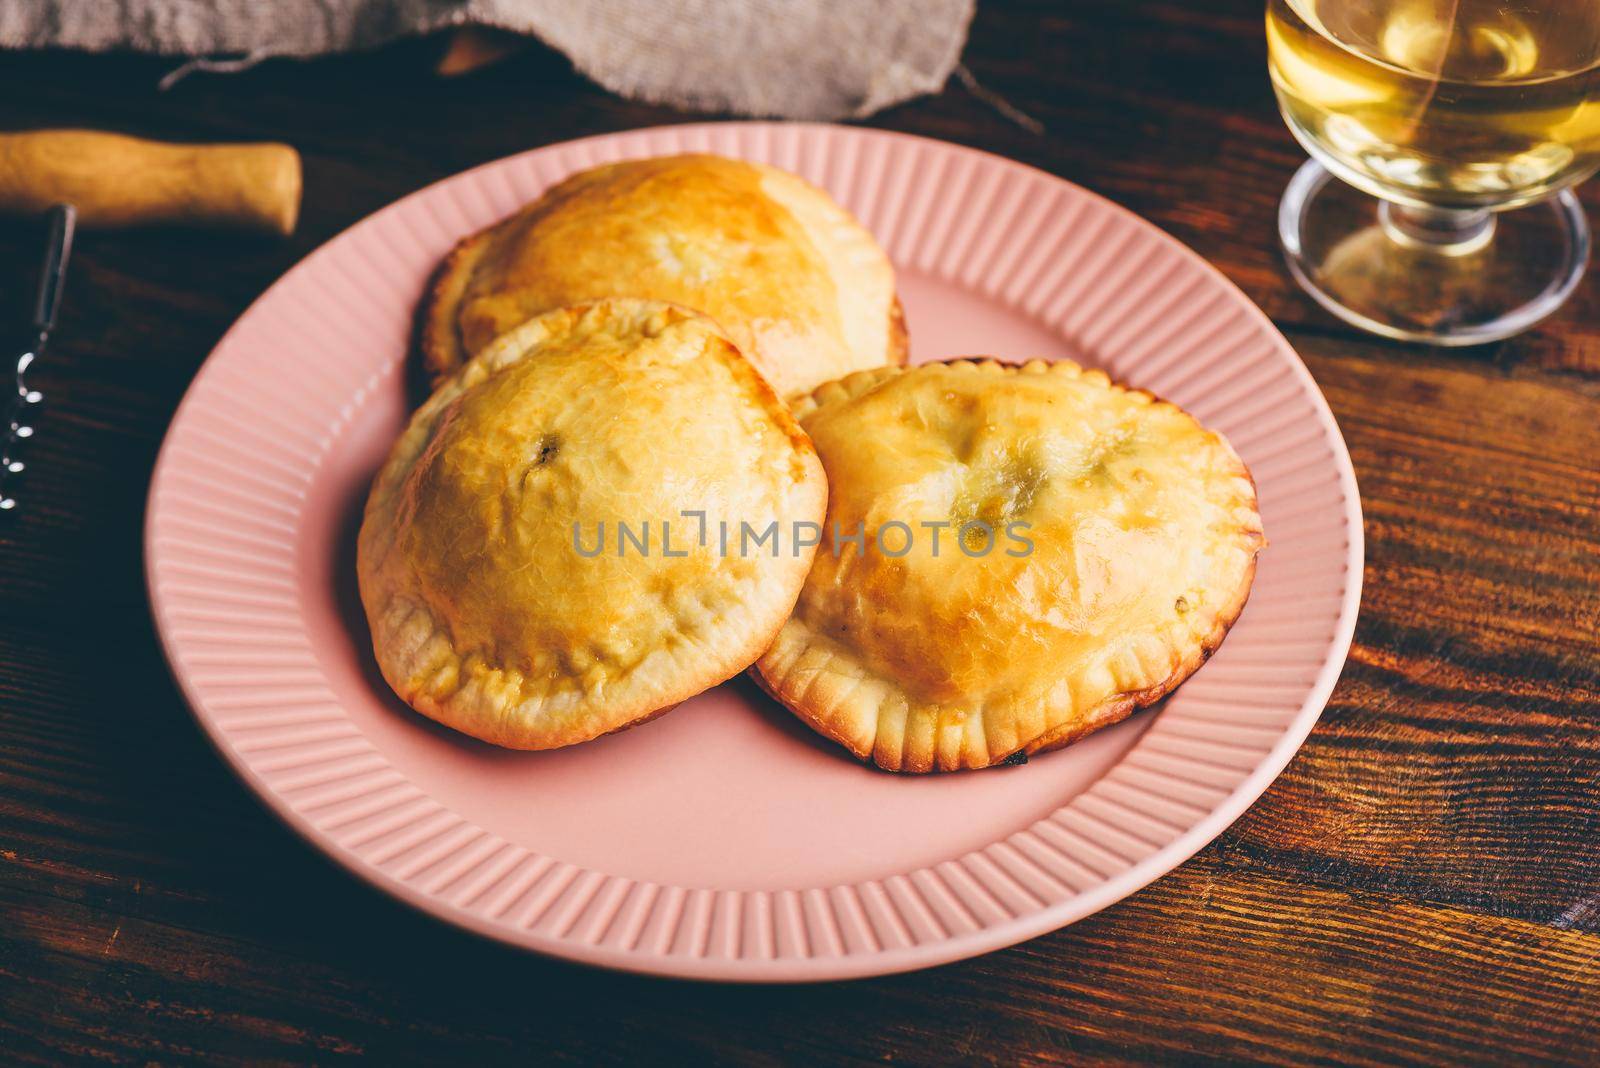 Baked Hand Pies with Chives and Mushrooms on Plate with Glass of Wine by Seva_blsv